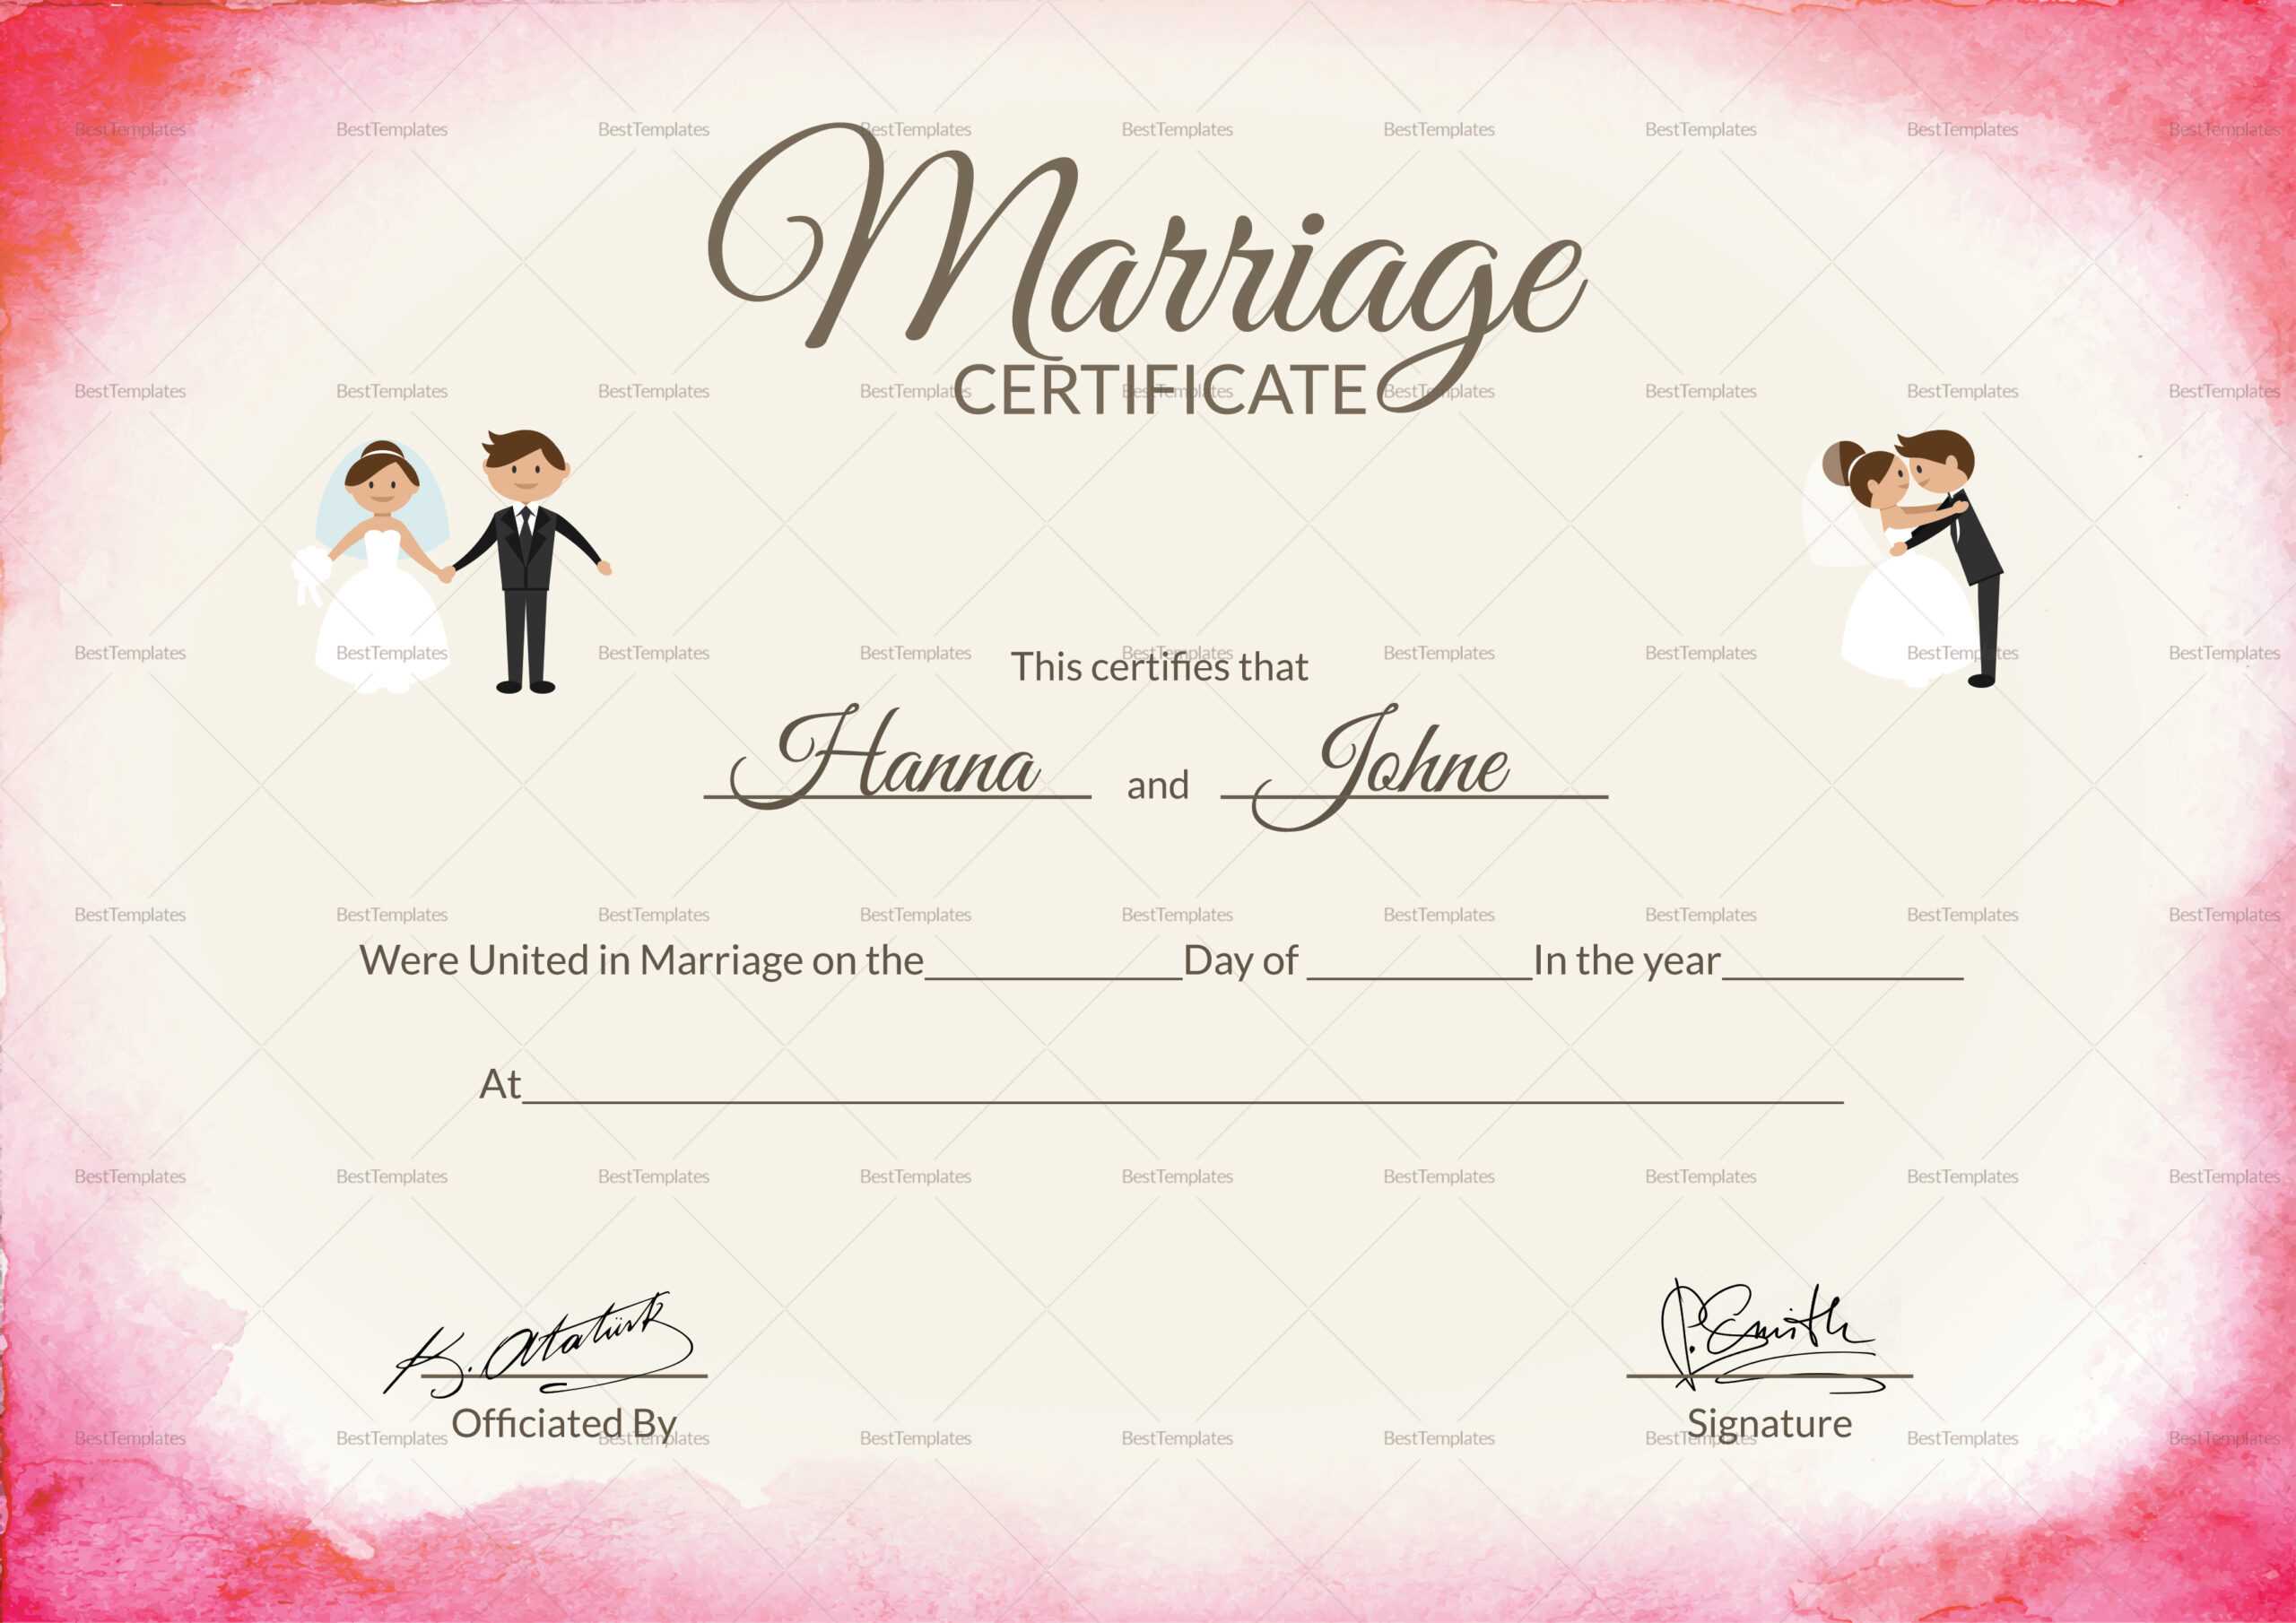 014 Certificate Of Marriage Template Il 794Xn 1822543356 Intended For Certificate Of Marriage Template